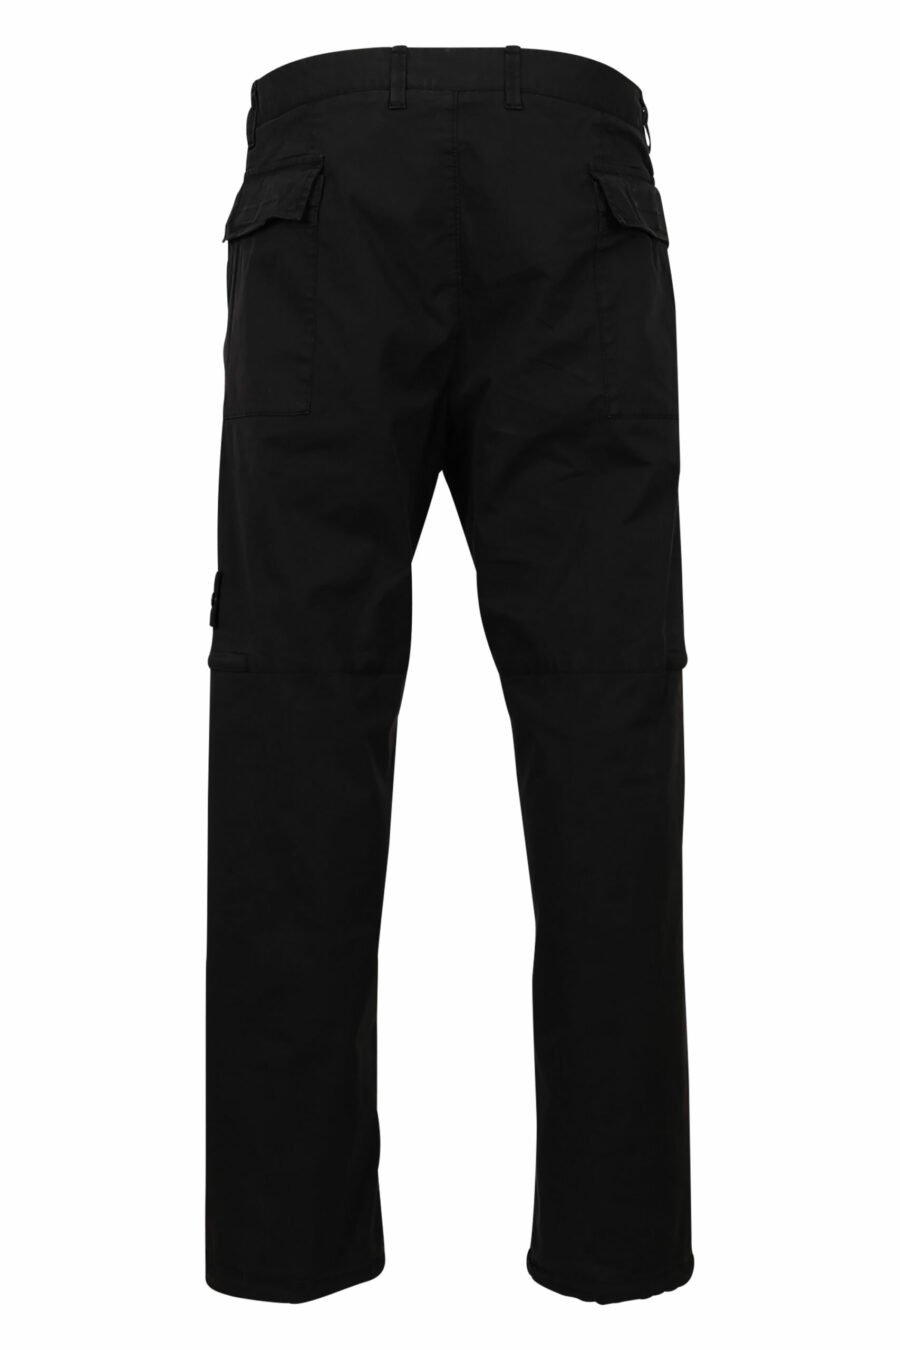 Black cargo trousers with pockets and logo patch - 8052572731846 2 scaled